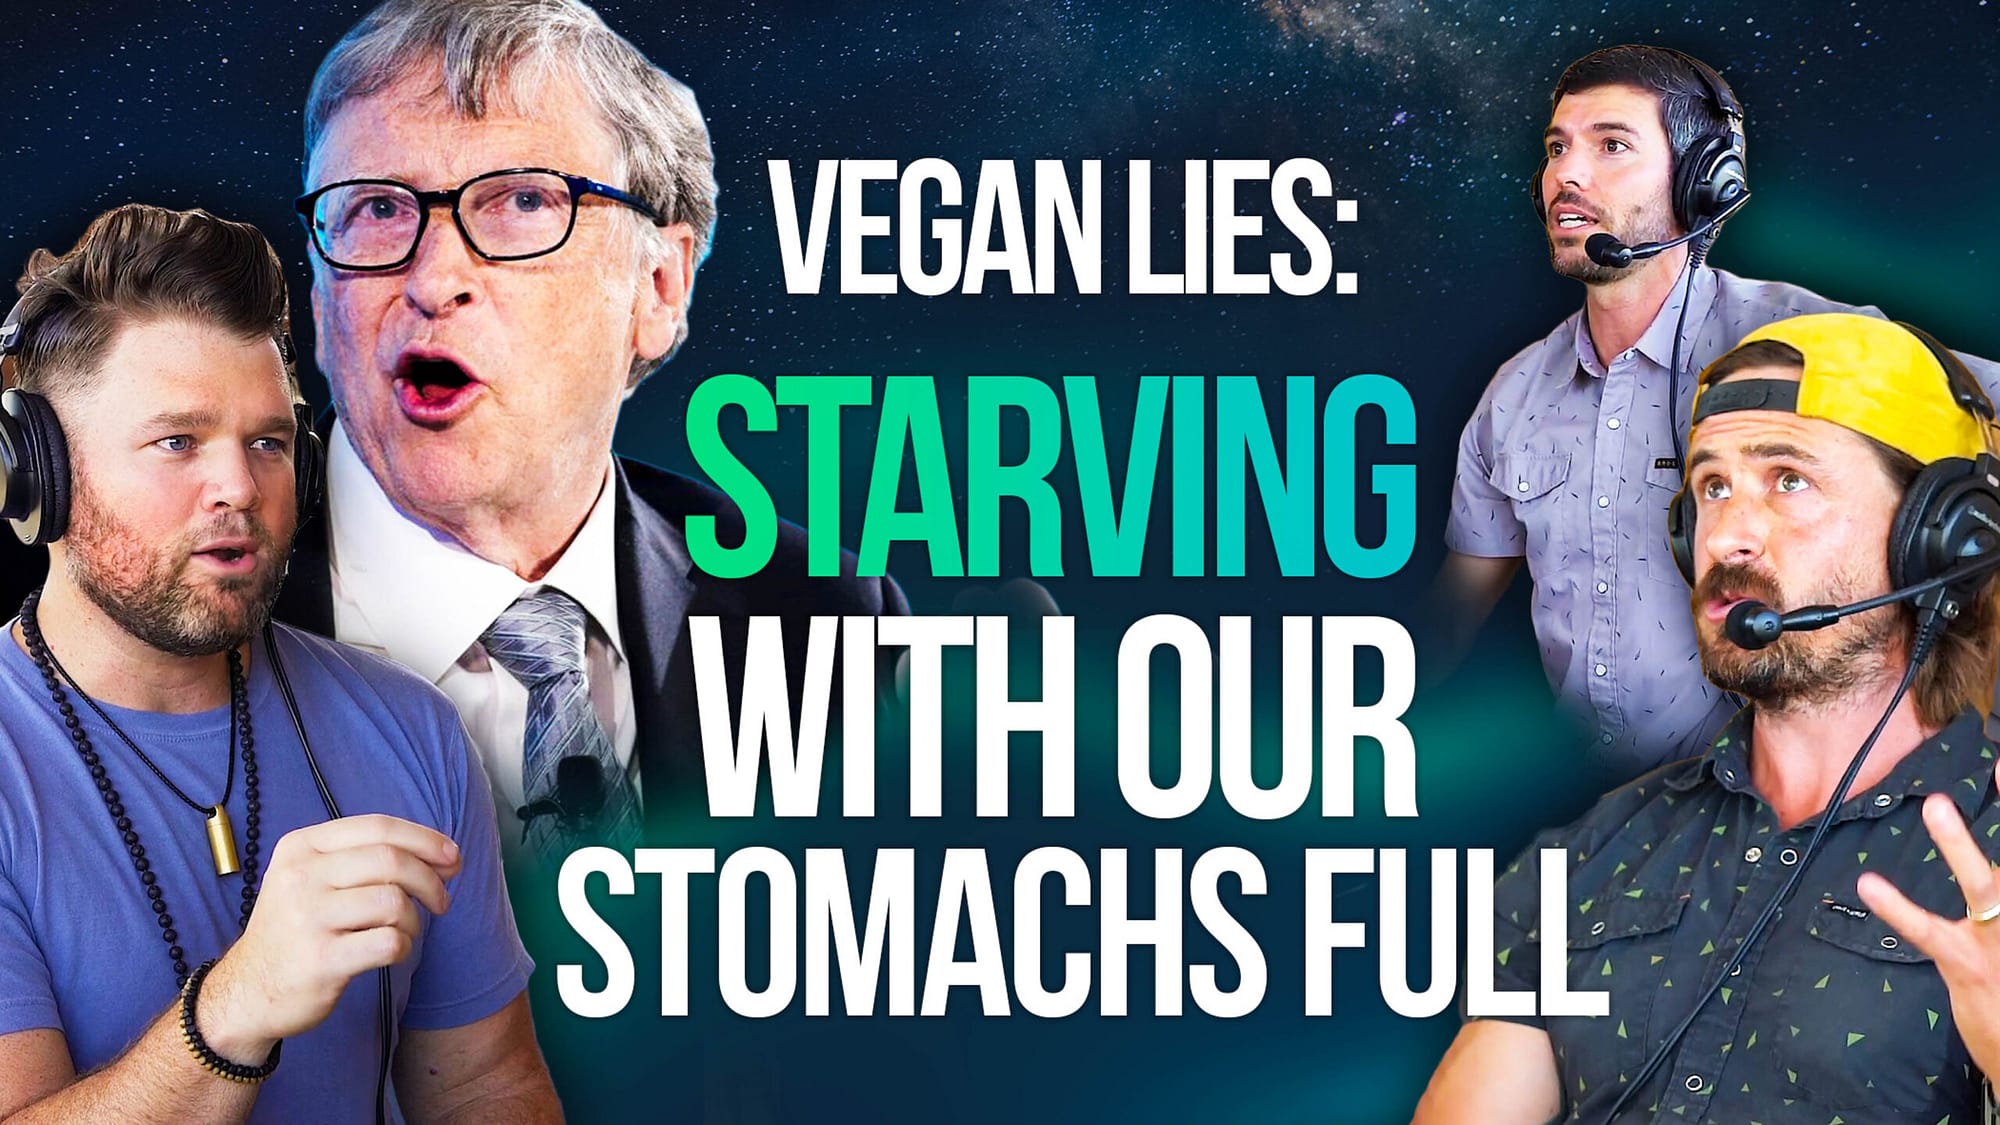 Taylor Collins + Robby Sansom | Omnivorous Truth: Bill Gates, Synthetic Meat, Vegan Lies + Healing with Regenerative Ranching